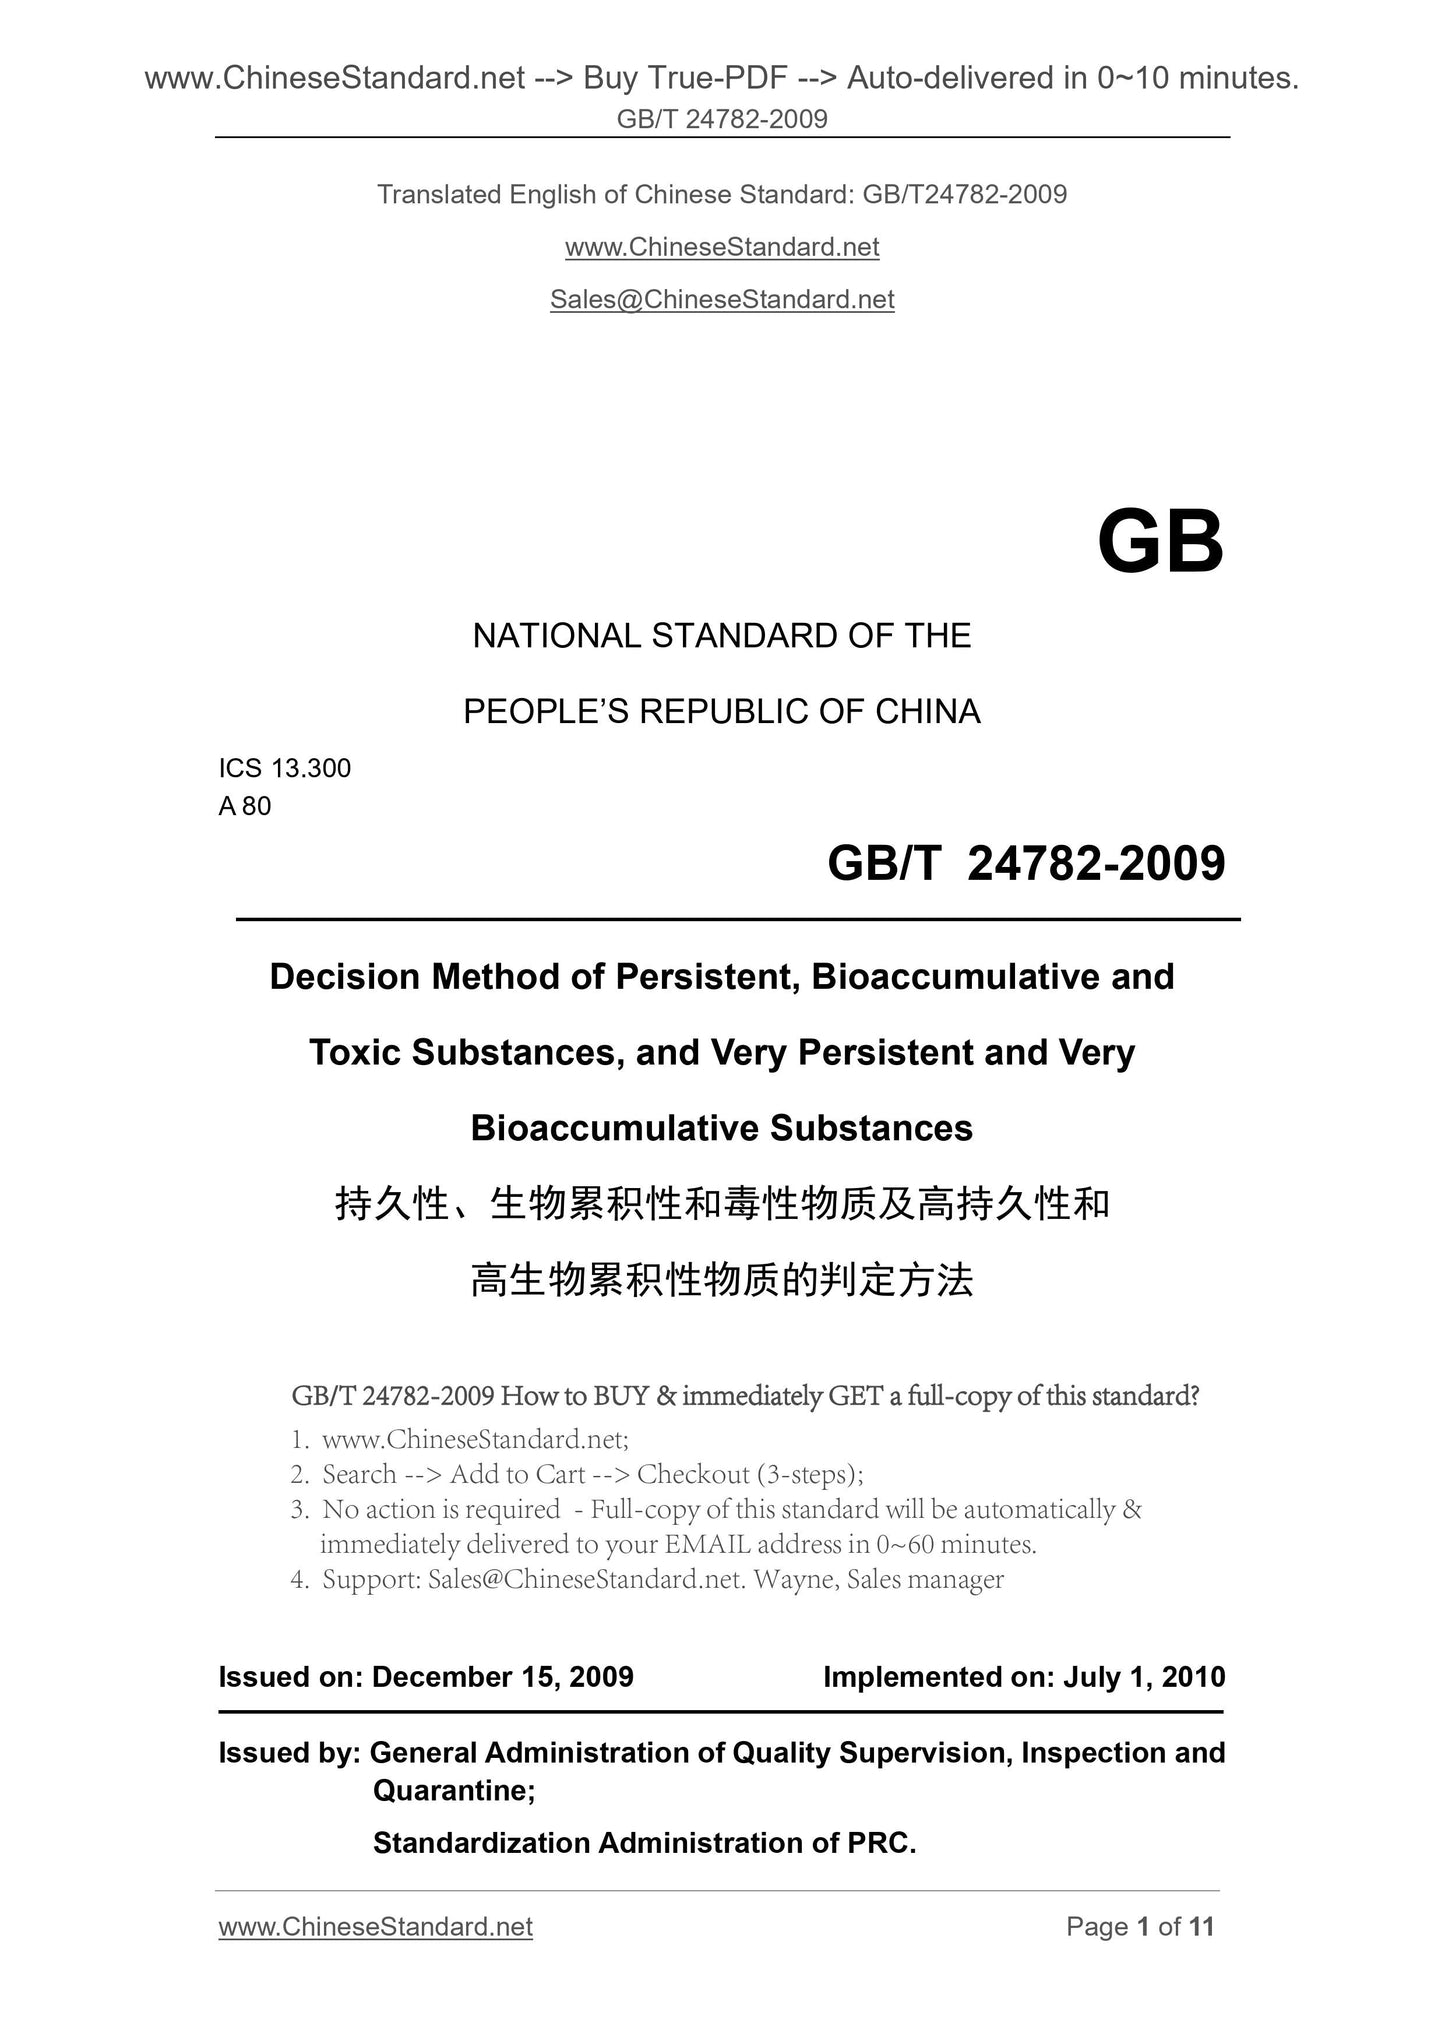 GB/T 24782-2009 Page 1